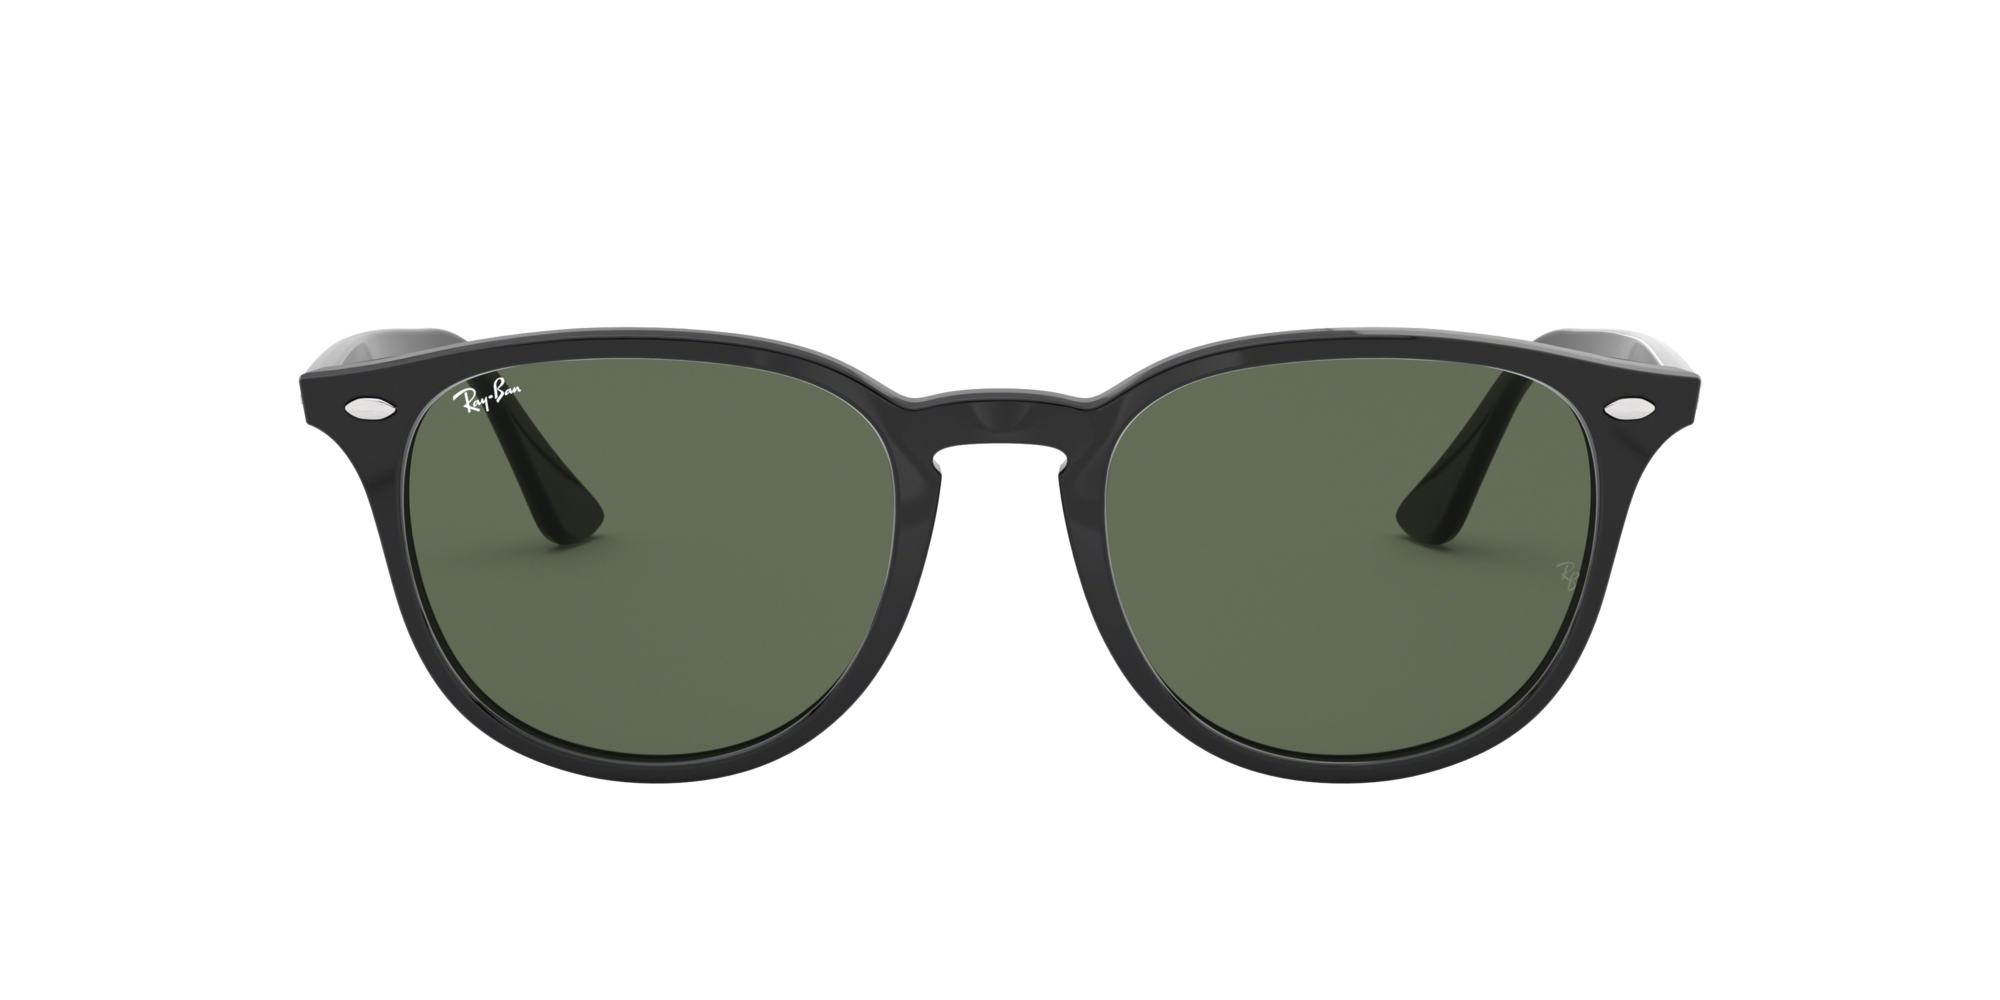 Ray Ban 0rb4259 Sunglasses In Black Target Optical